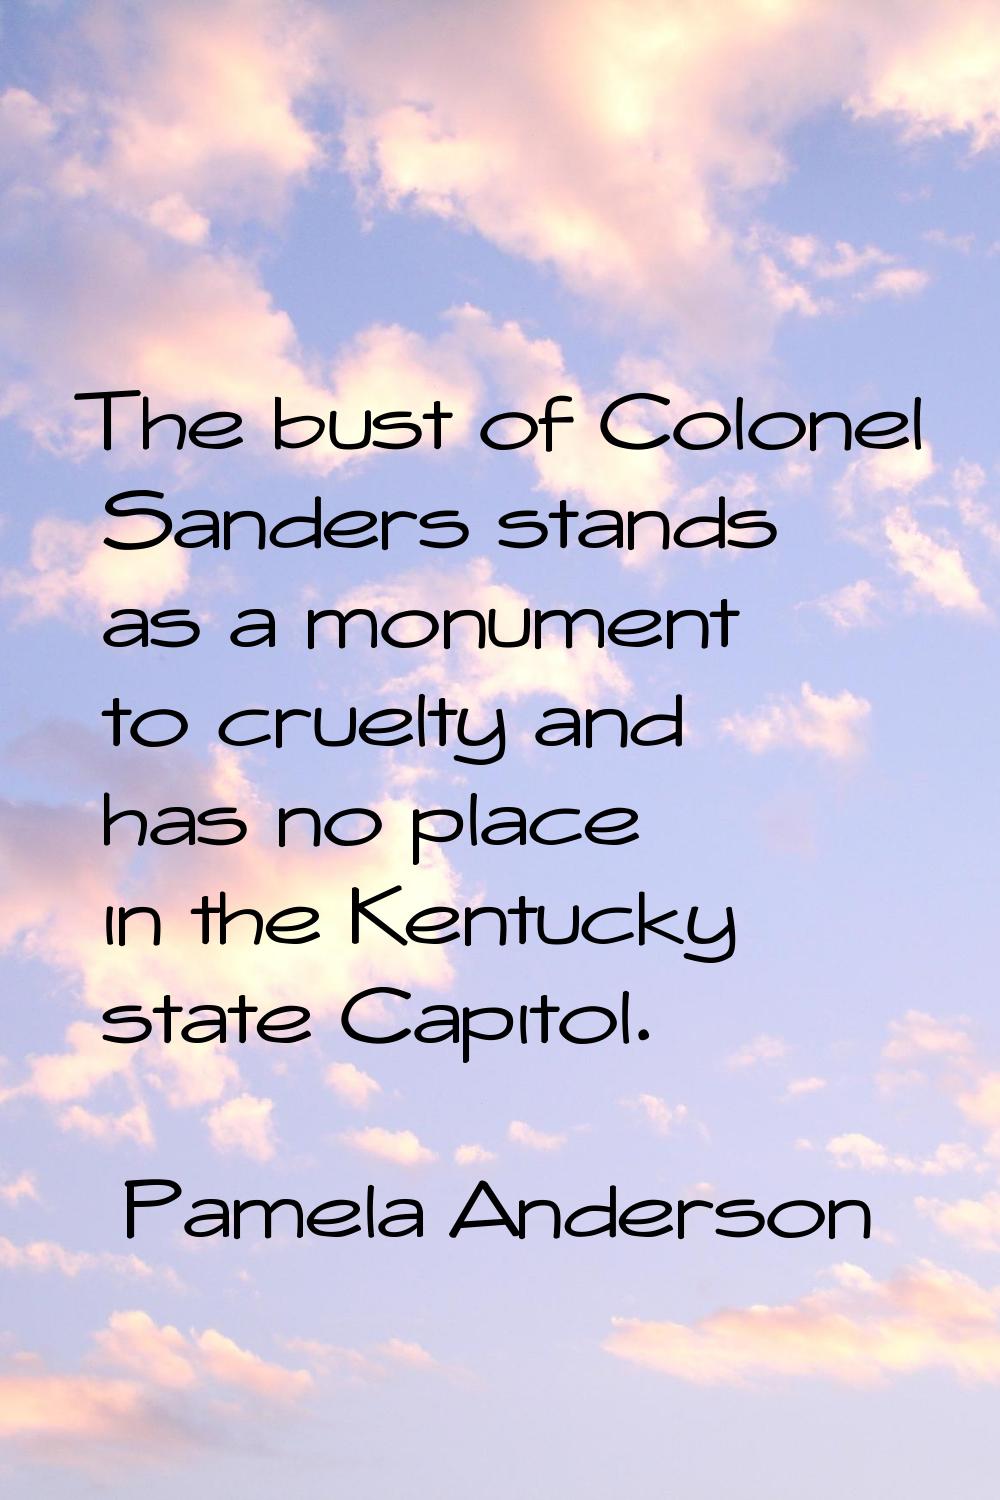 The bust of Colonel Sanders stands as a monument to cruelty and has no place in the Kentucky state 